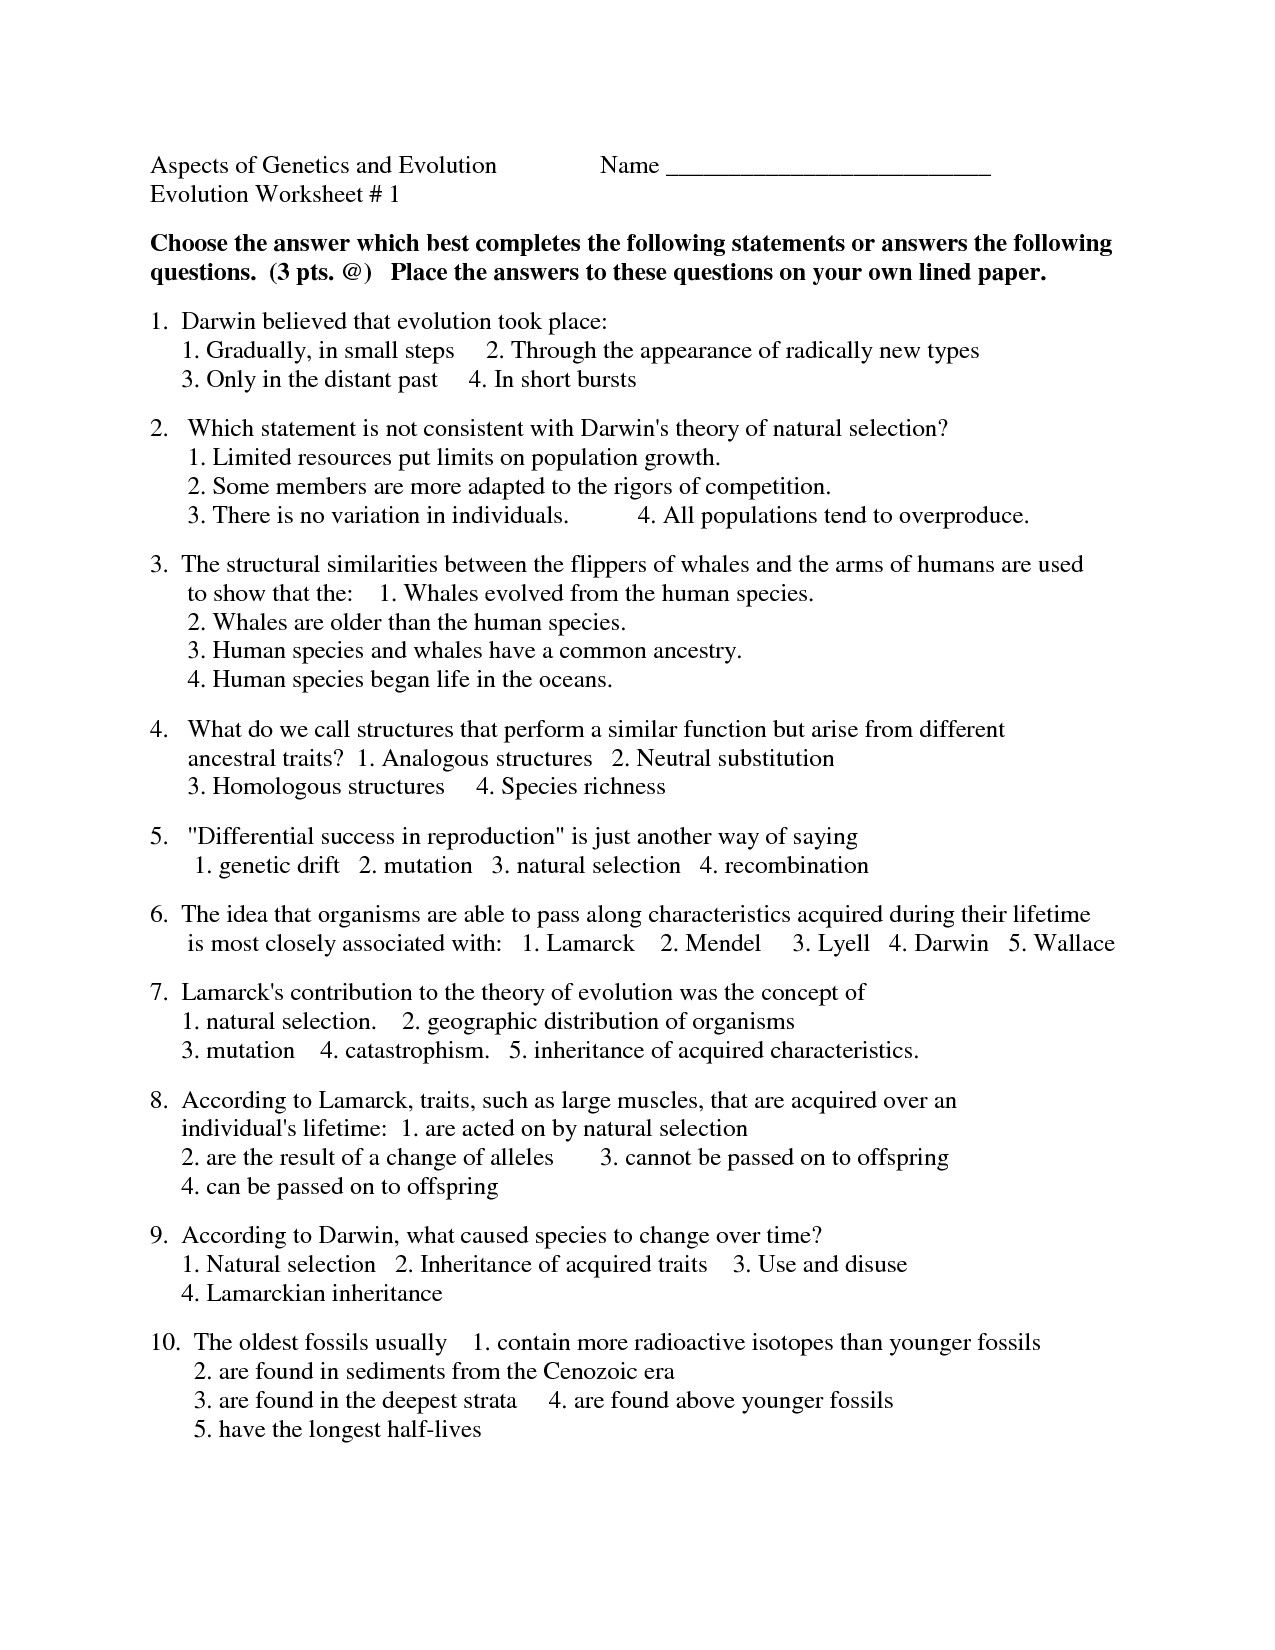 Stars And Galaxies Worksheet Answers